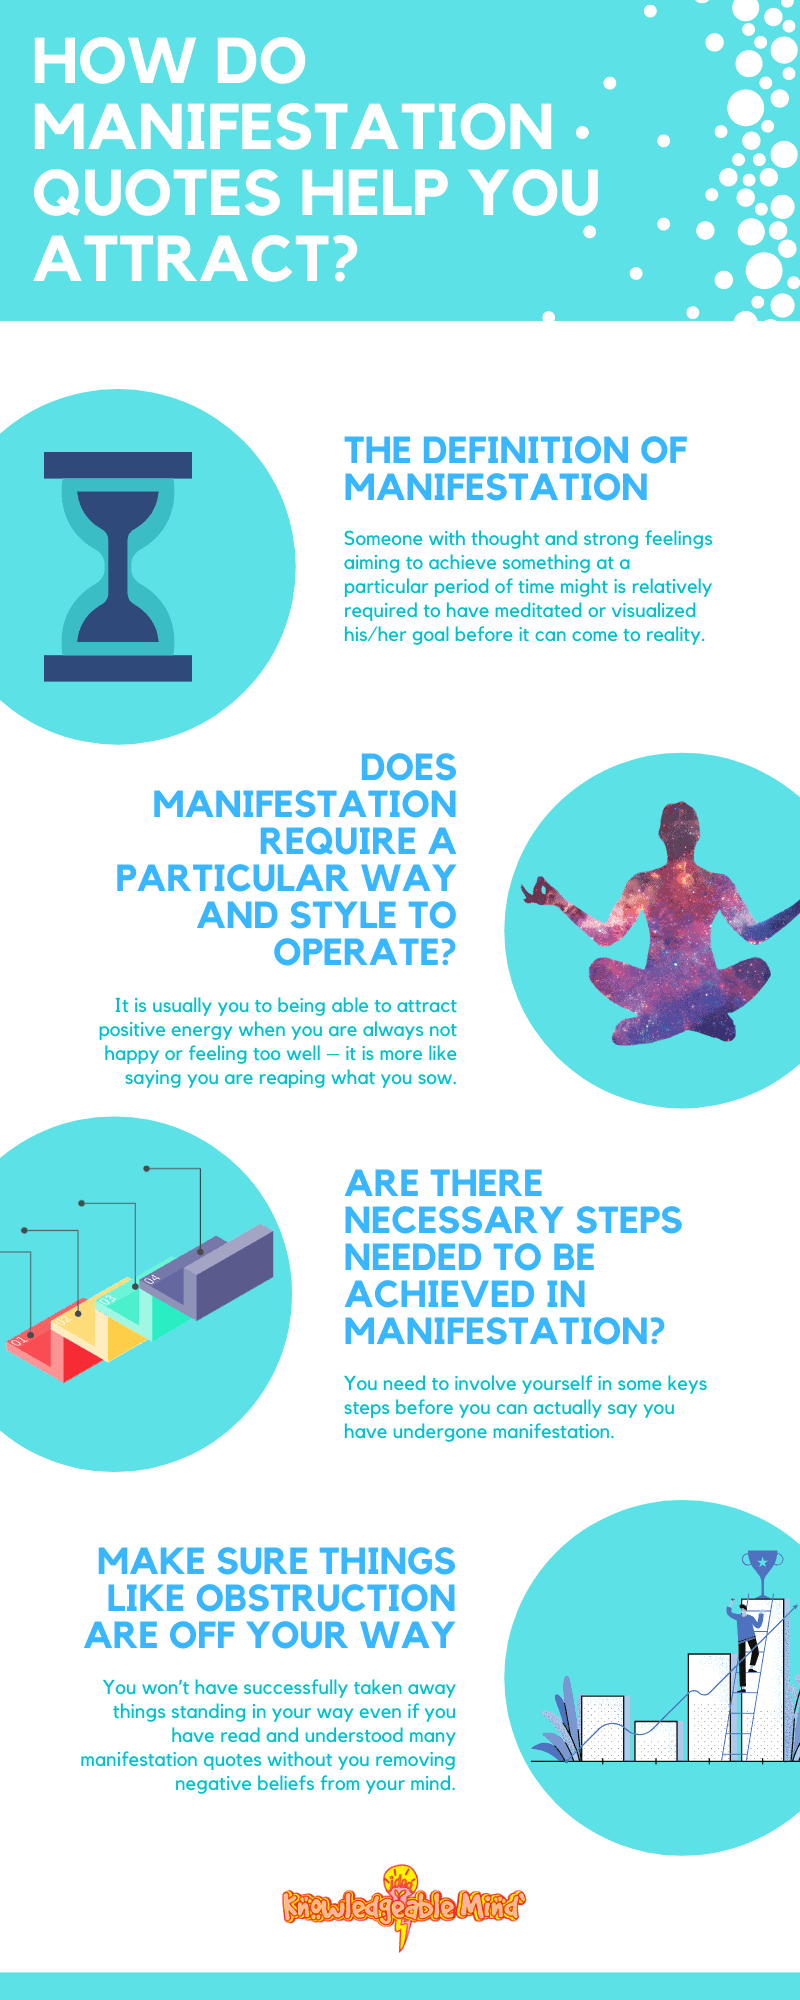 How Do Manifestation Quotes Help You Attract